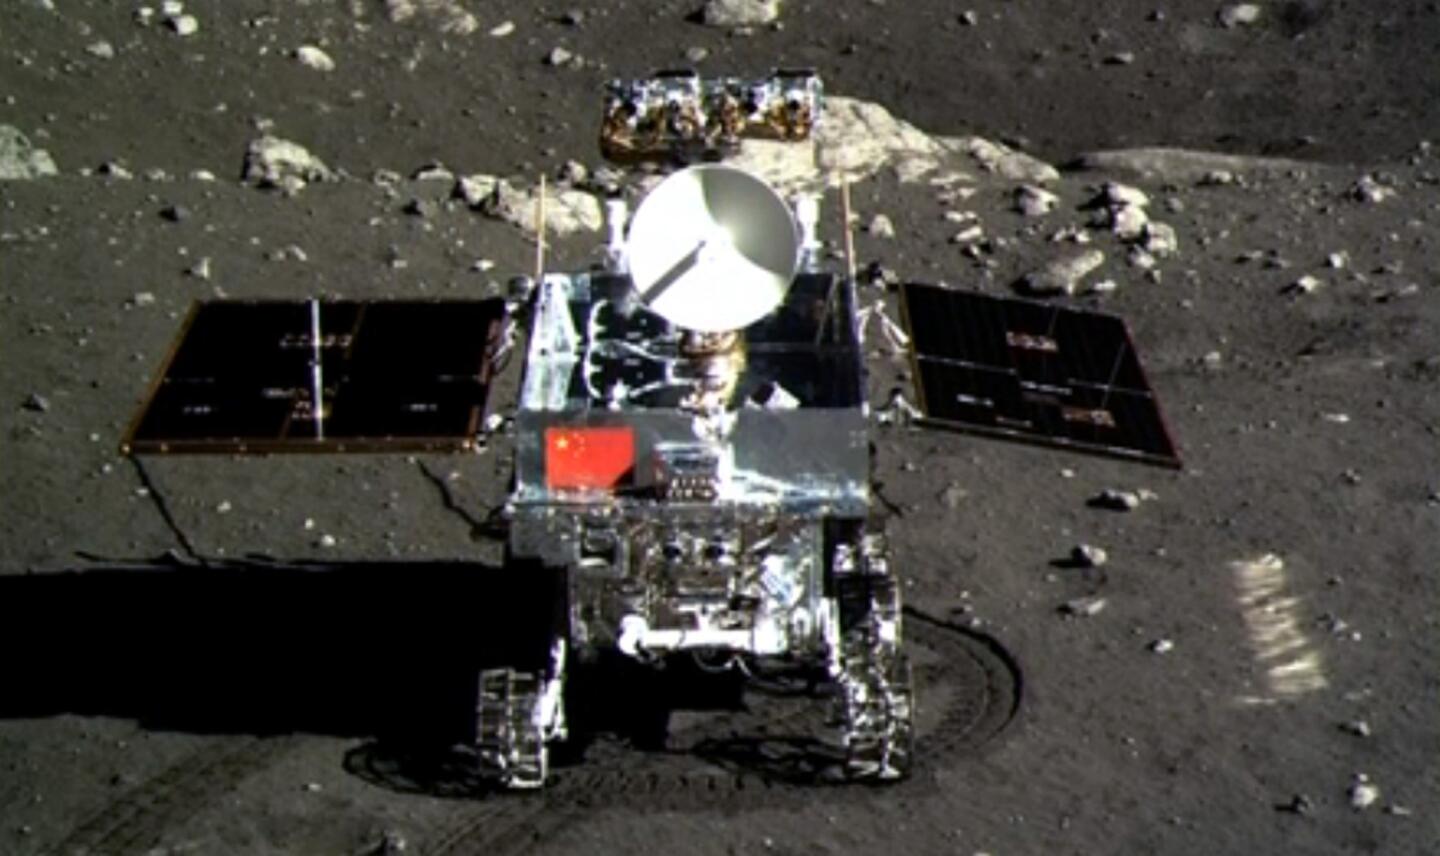 Television footage shows a photo of China's Jade Rabbit lunar rover taken by the Chang'e 3 probe lander on Dec. 15.